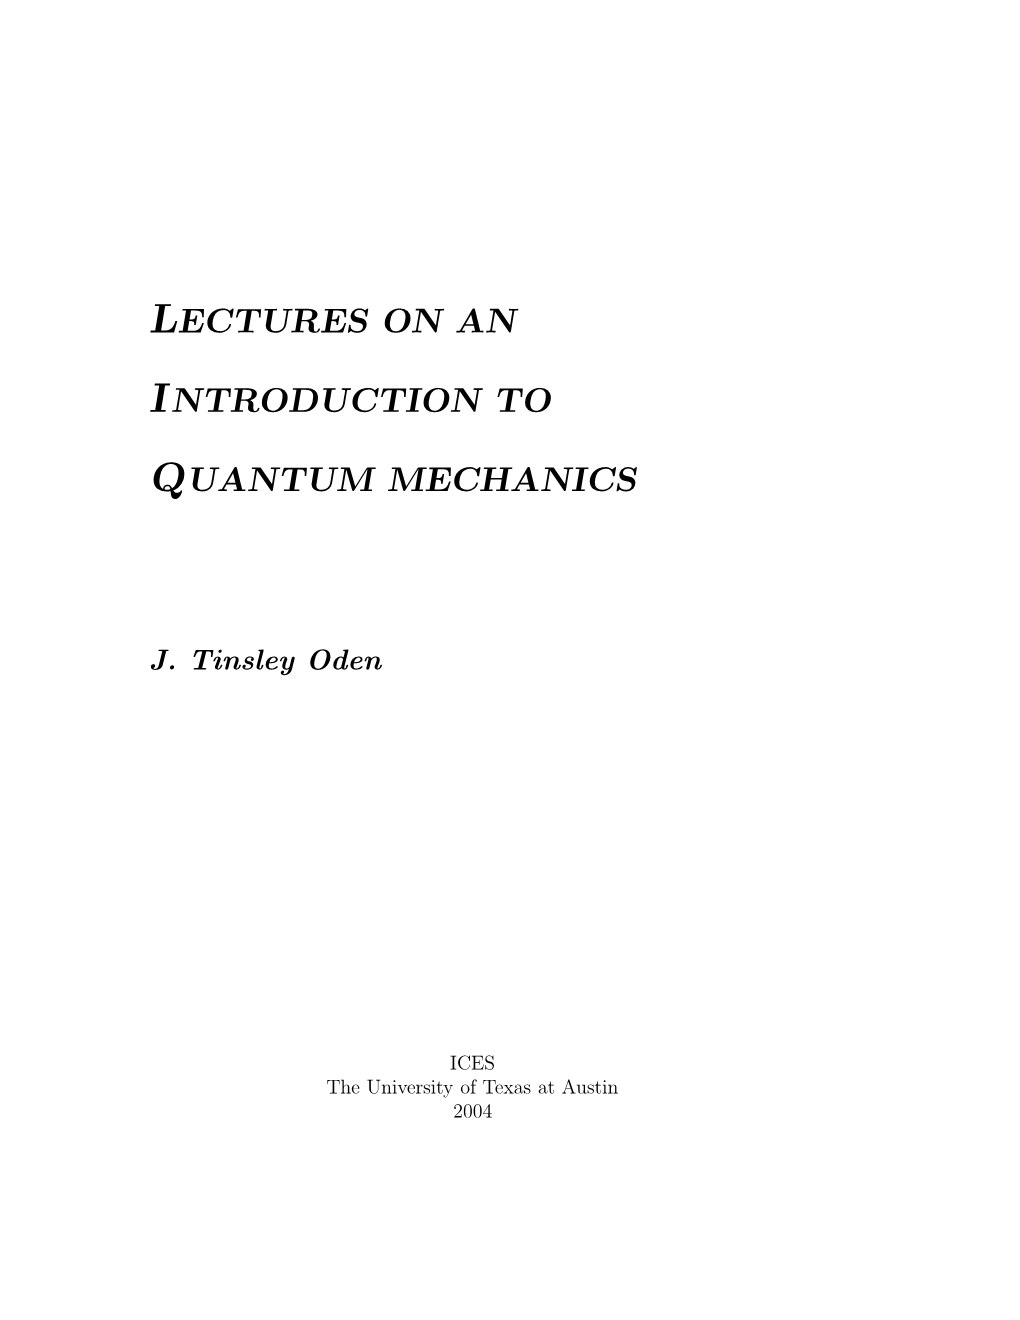 Lectures on an Introduction to Quantum Mechanics